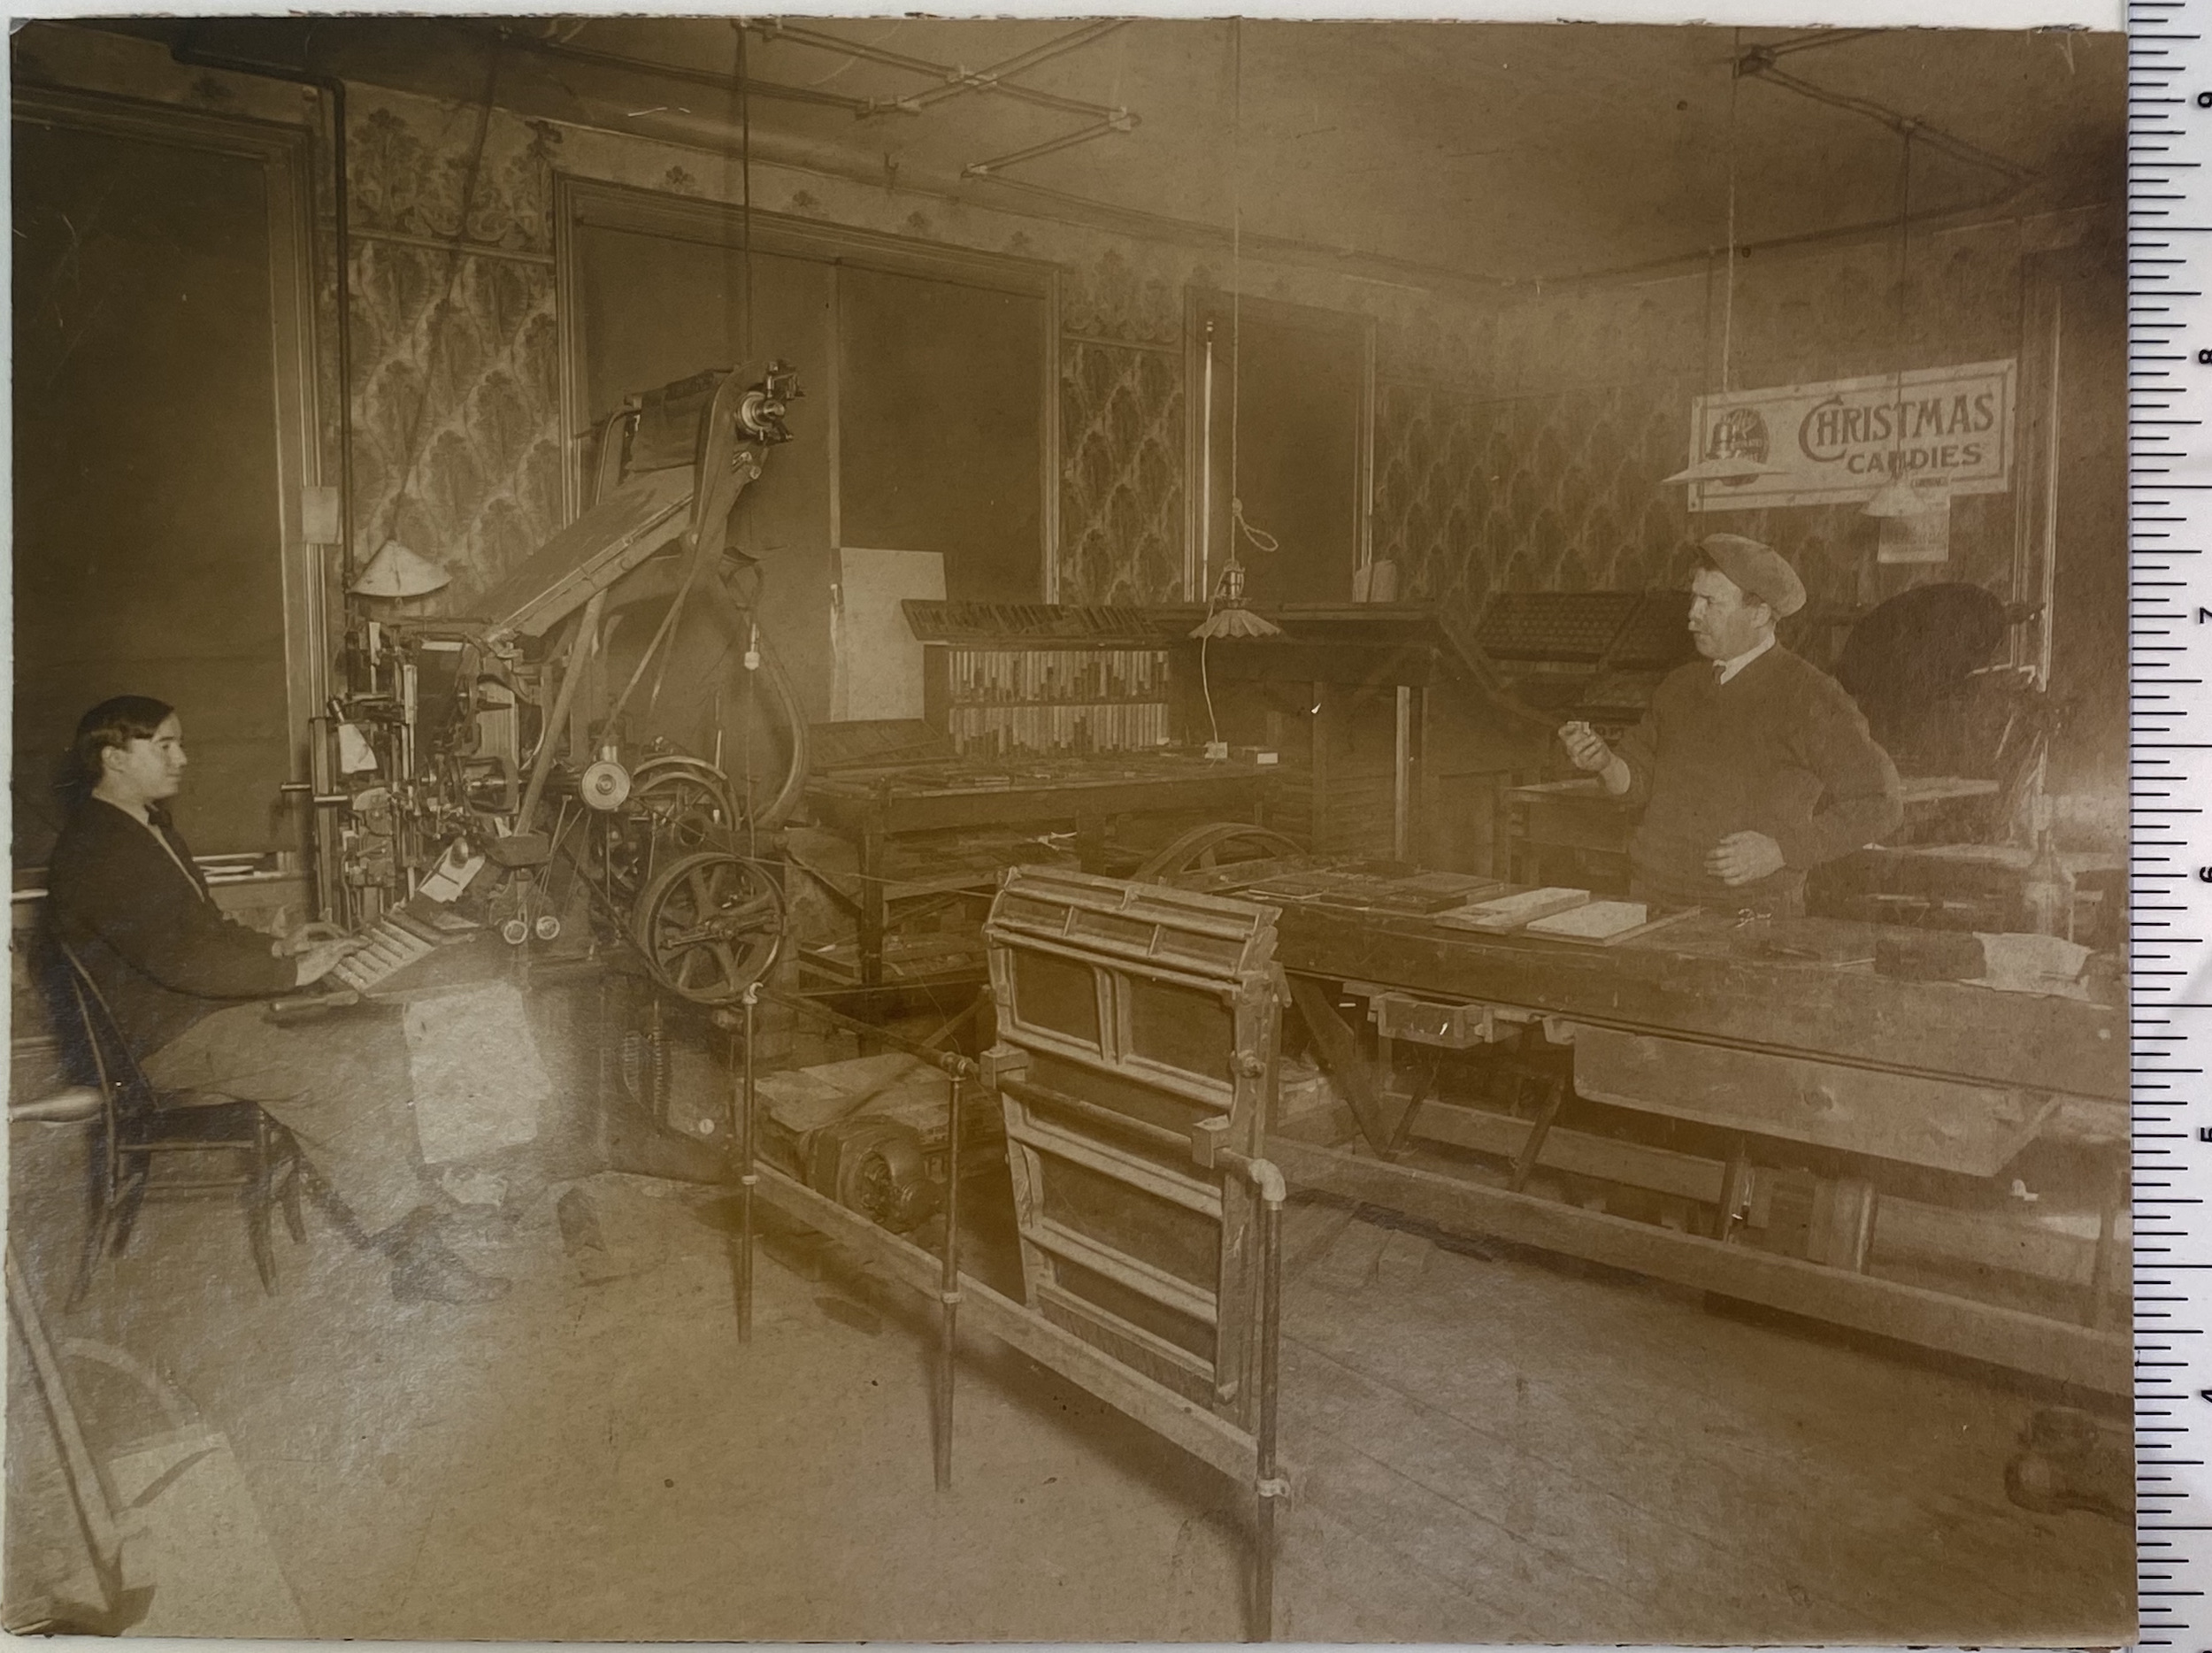 Single Linotype machine and operator in a small printing shop circa 1910